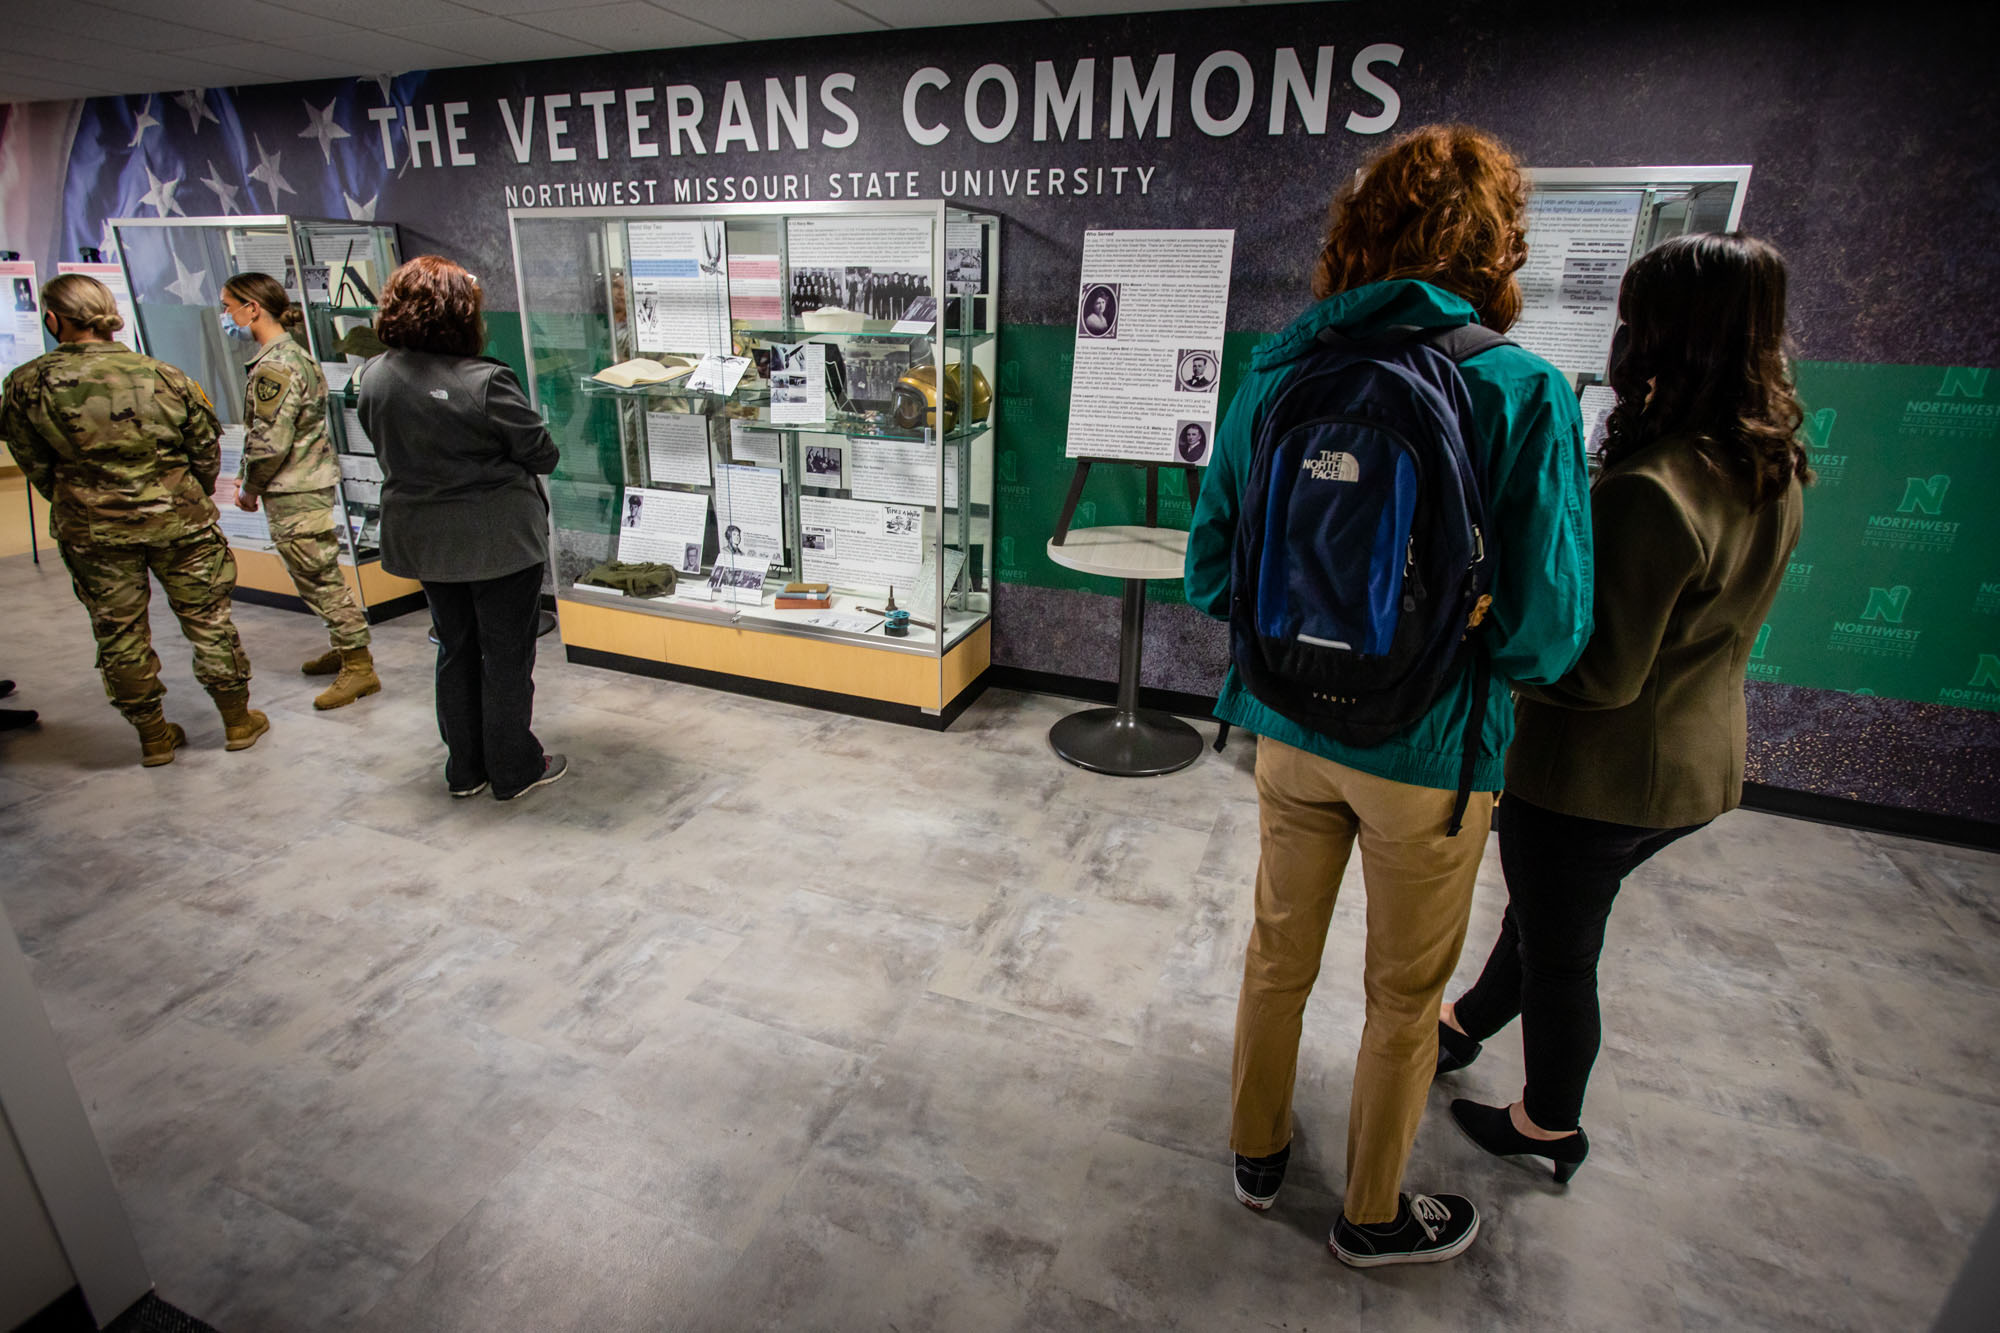 Veterans Commons on the upper floor of Valk Center features an exhibit space dedicated to the military experiences of students, faculty and staff as well as University activities during times of significant military conflict. A new exhibit this fall commemorates the 80th anniversary of the attack on Pearl Harbor.